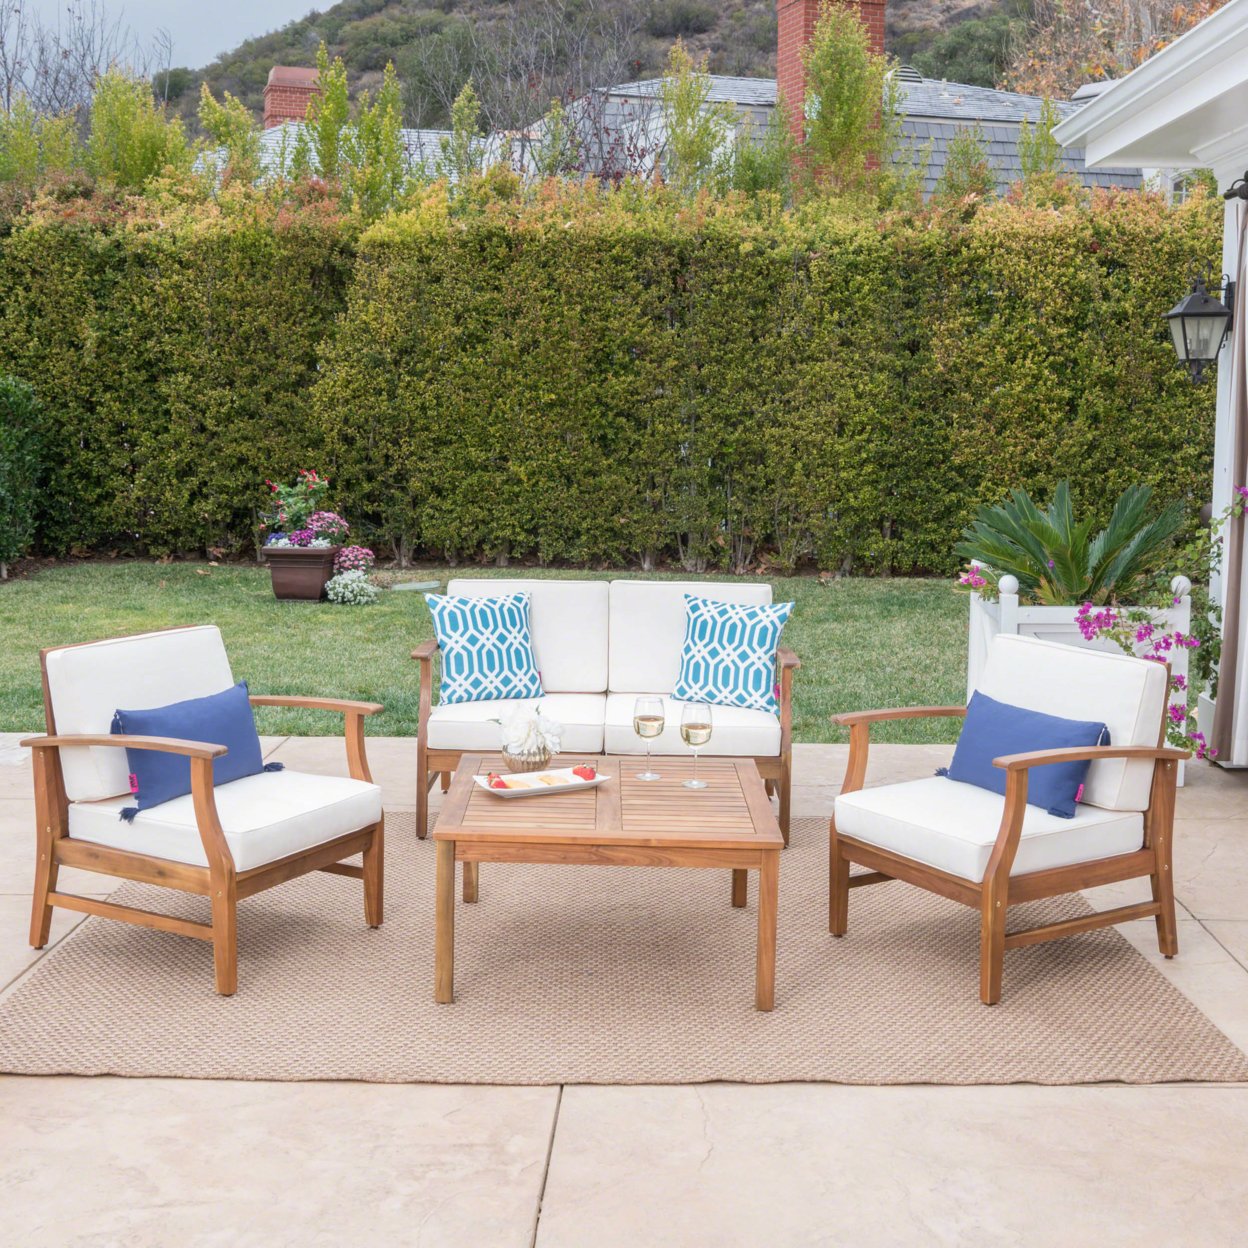 Lorelei Outdoor 4 Seat Teak Finished Acacia Wood Chat Set With Water Resistant Cushions - Blue